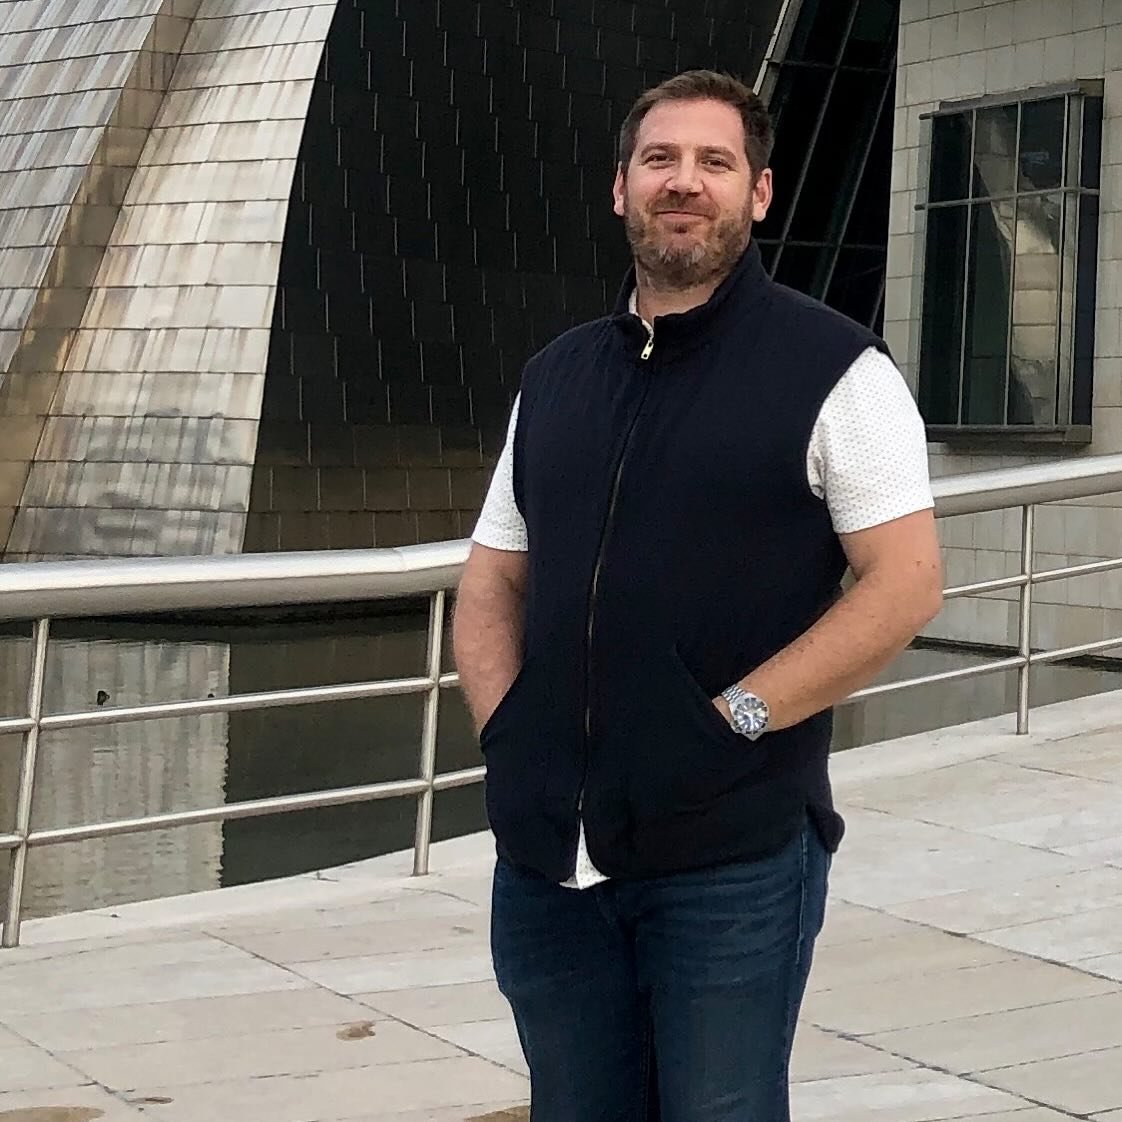 Please join us in welcoming Matt Lewis to the RELATE Lab team! Matt is the new Co-Director of Relational Leadership Programs but he&rsquo;s no stranger to the team. Matt has served as a Narrative Leadership and Advocacy trainer since the first RLI co